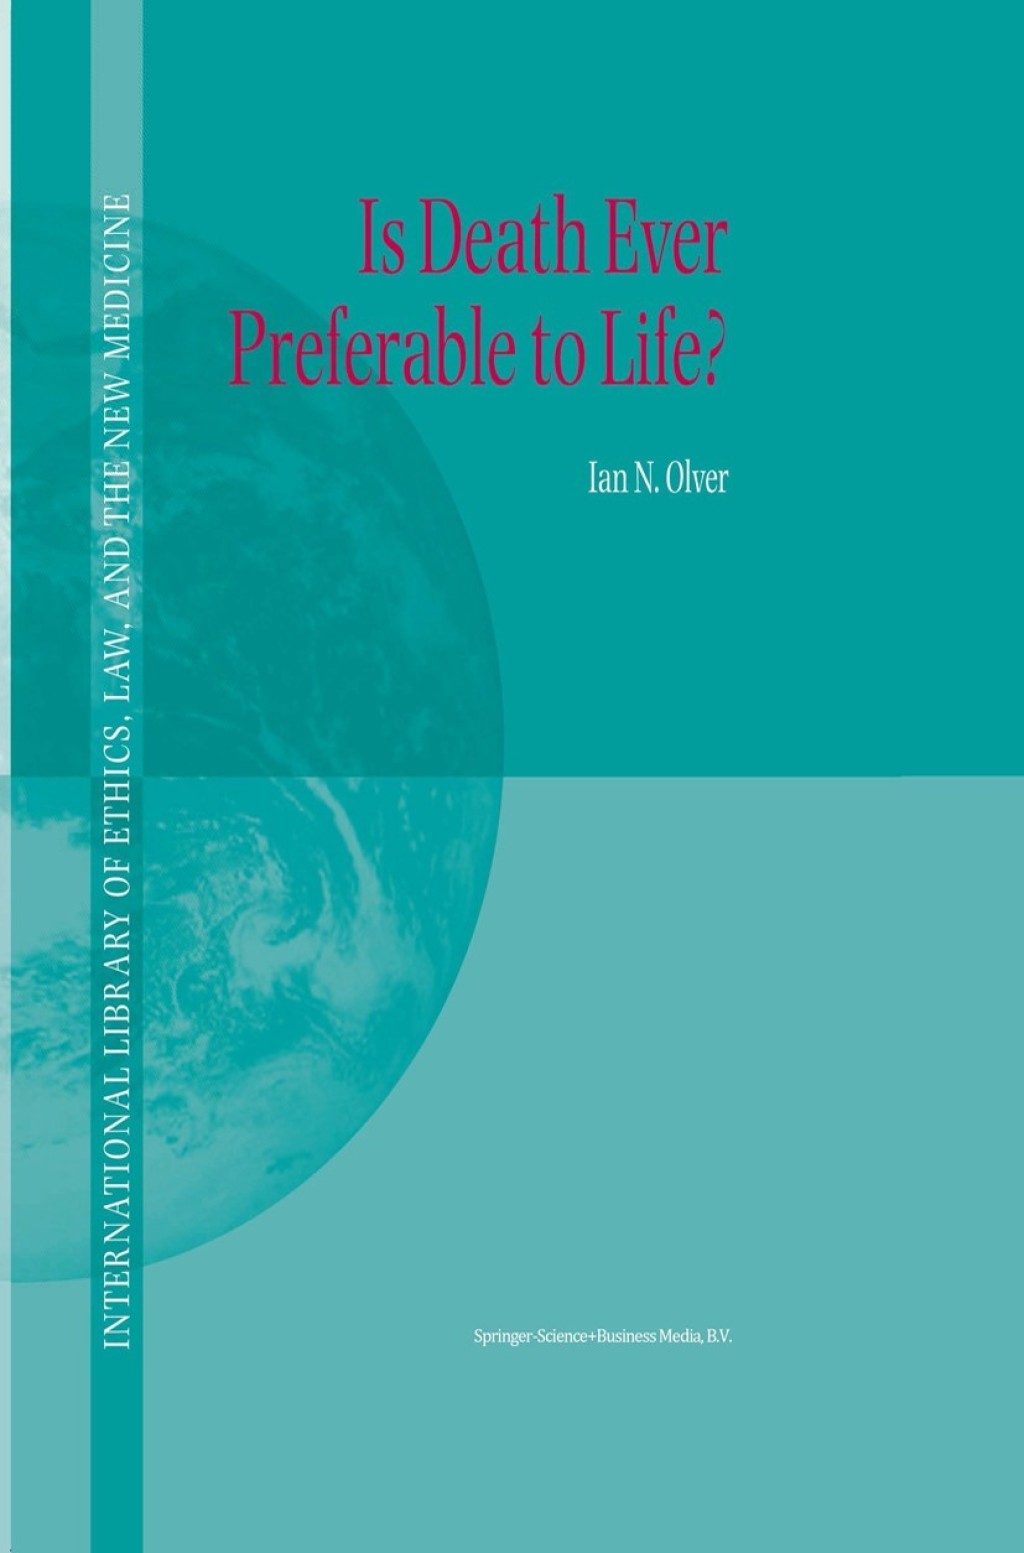 Is Death Ever Preferable to Life? (eBook Rental) - Ian Olver,